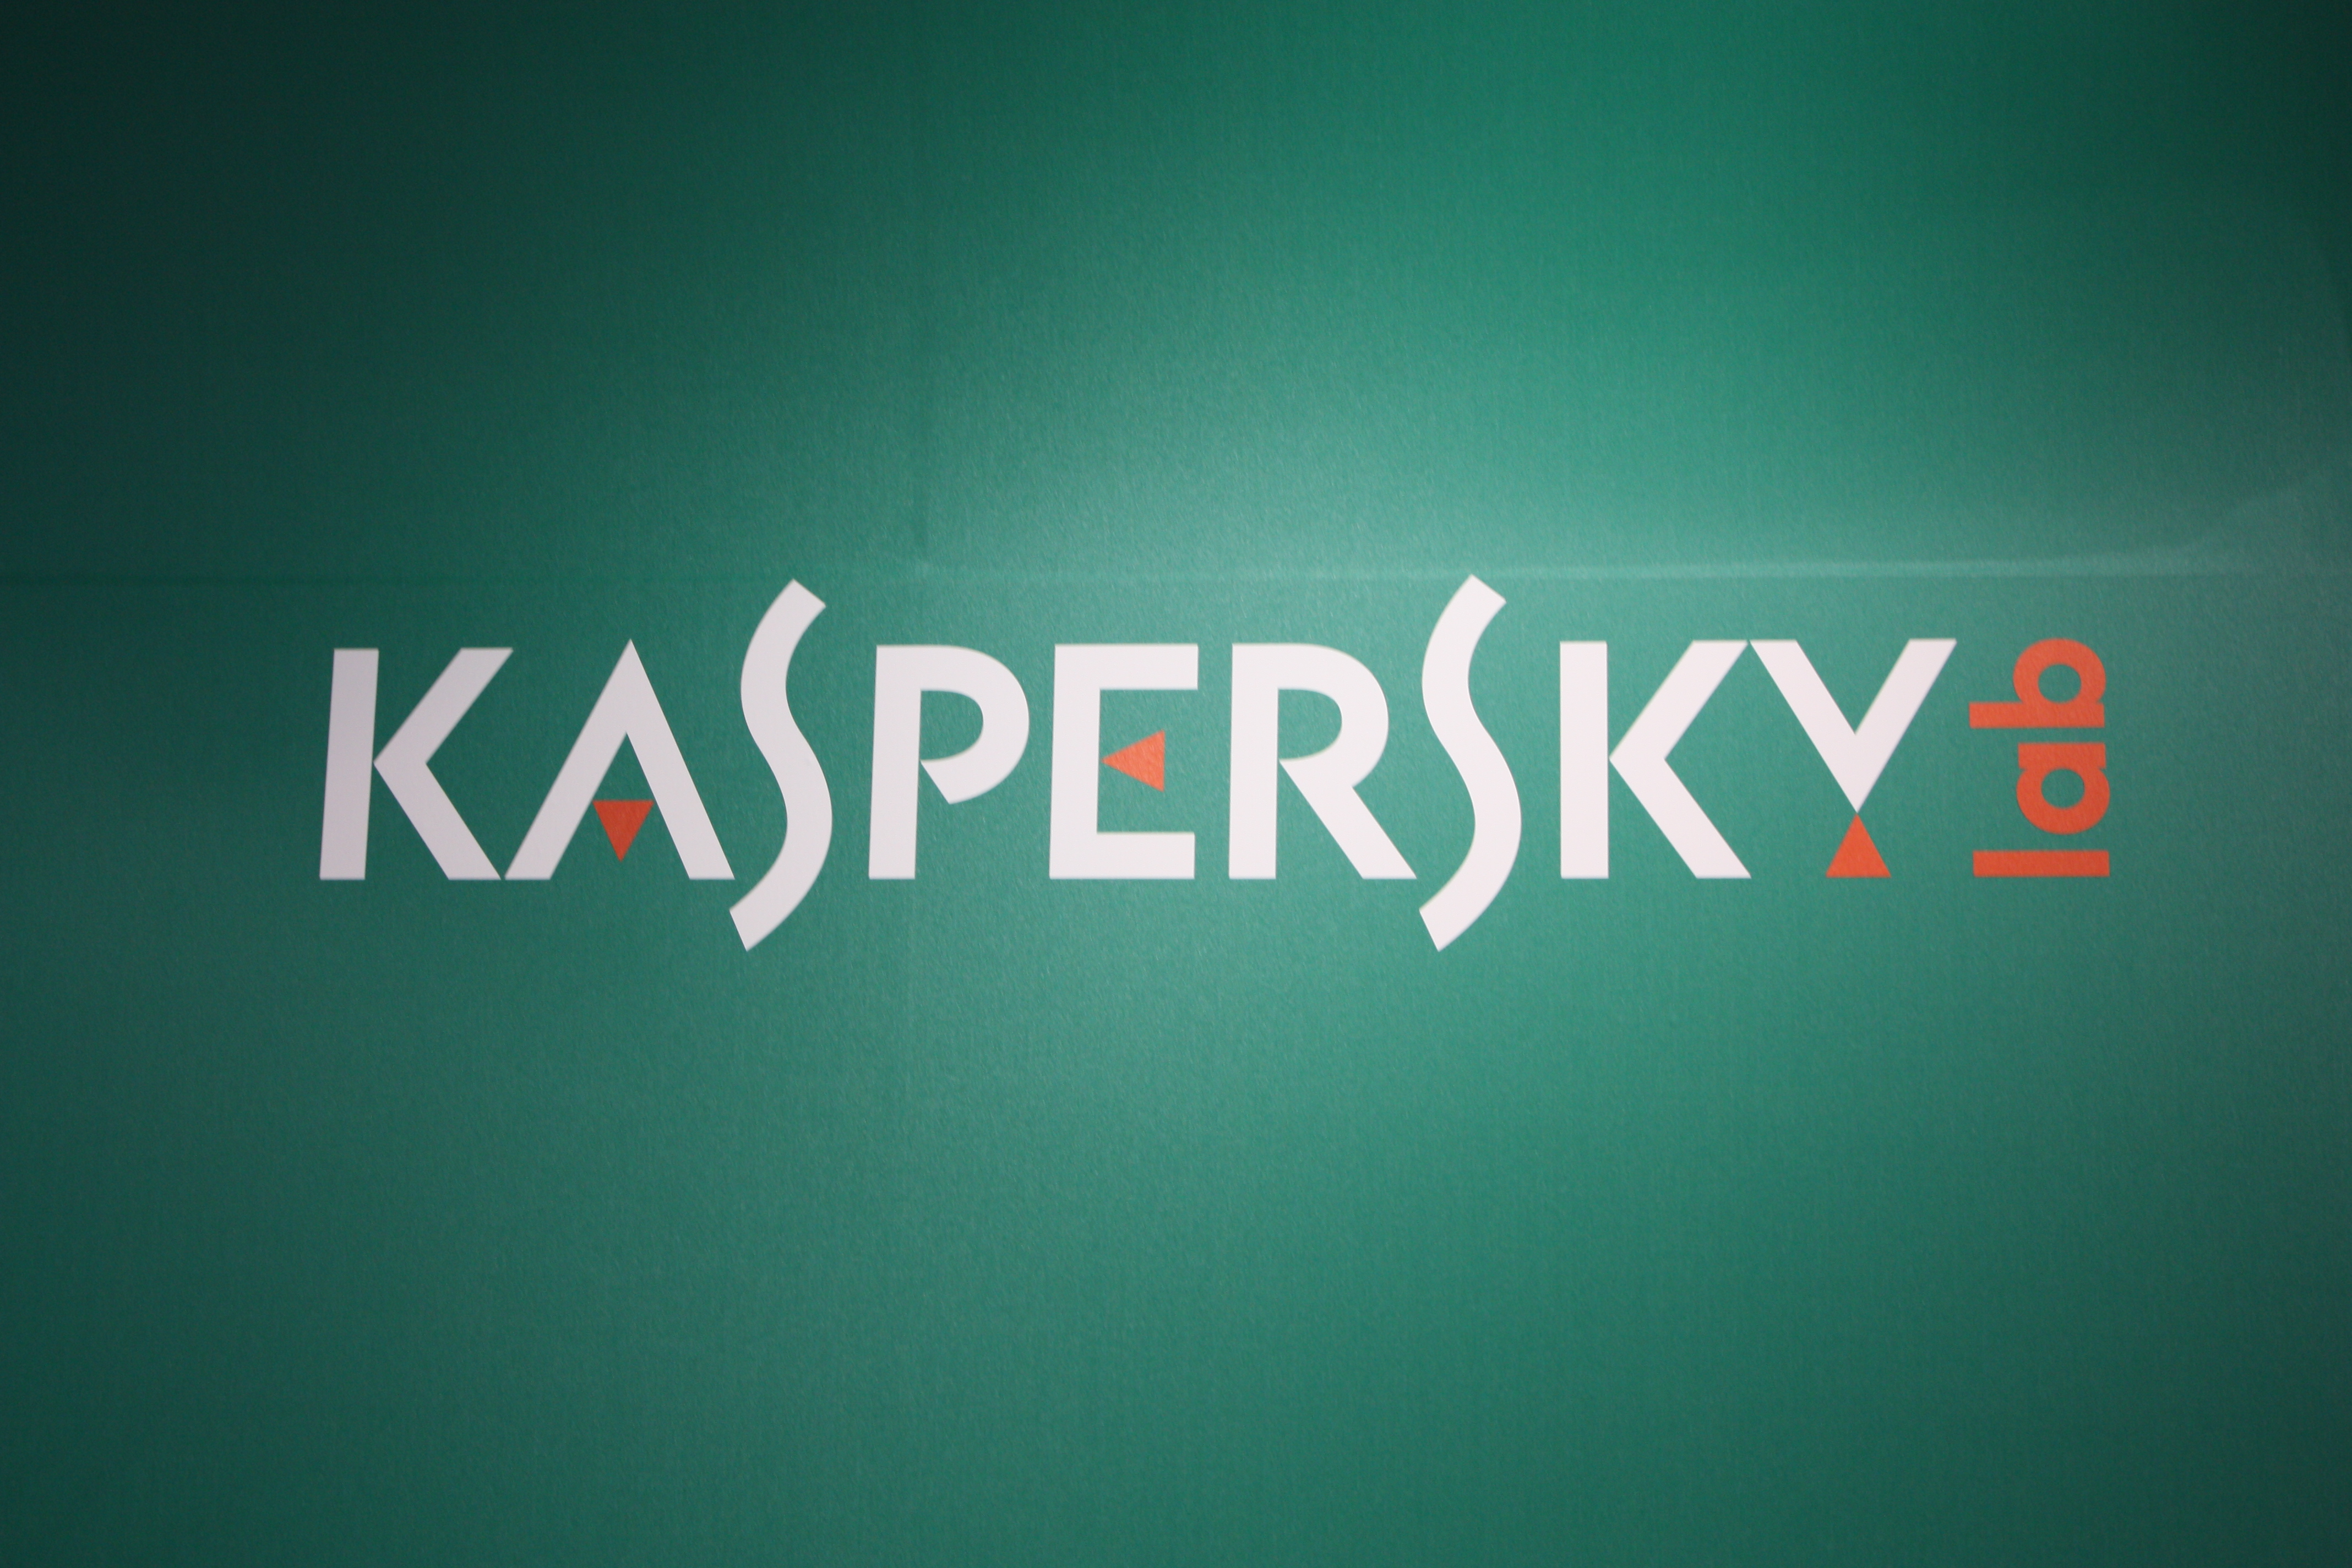 Kaspersky releases new threat intelligence solution 